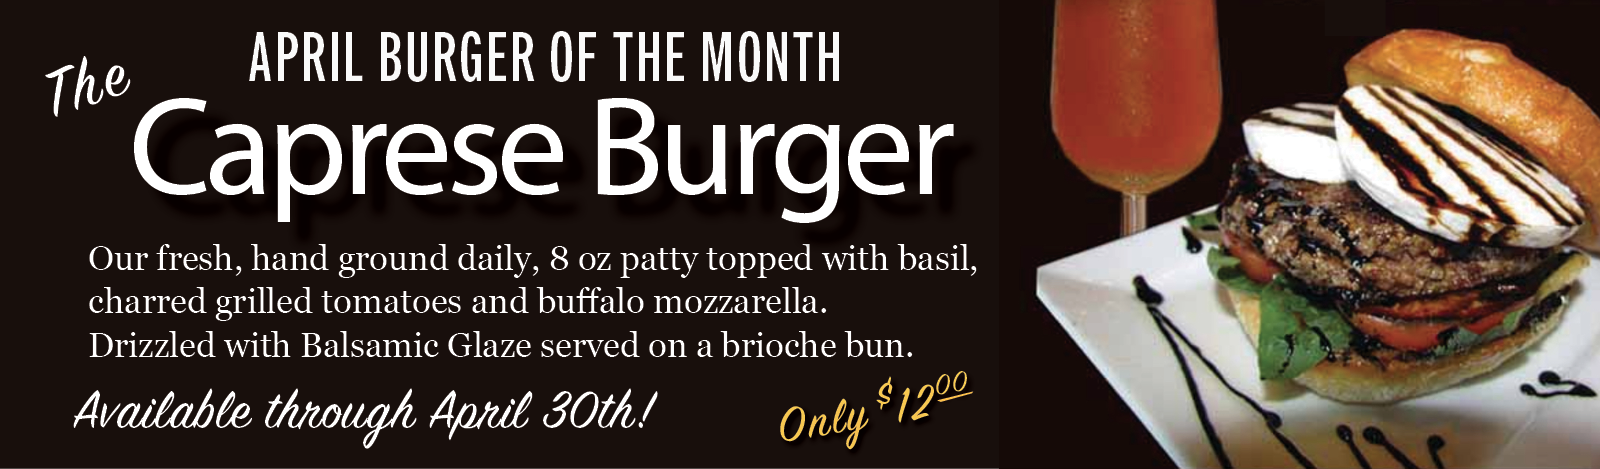 Burger of the Month Taos